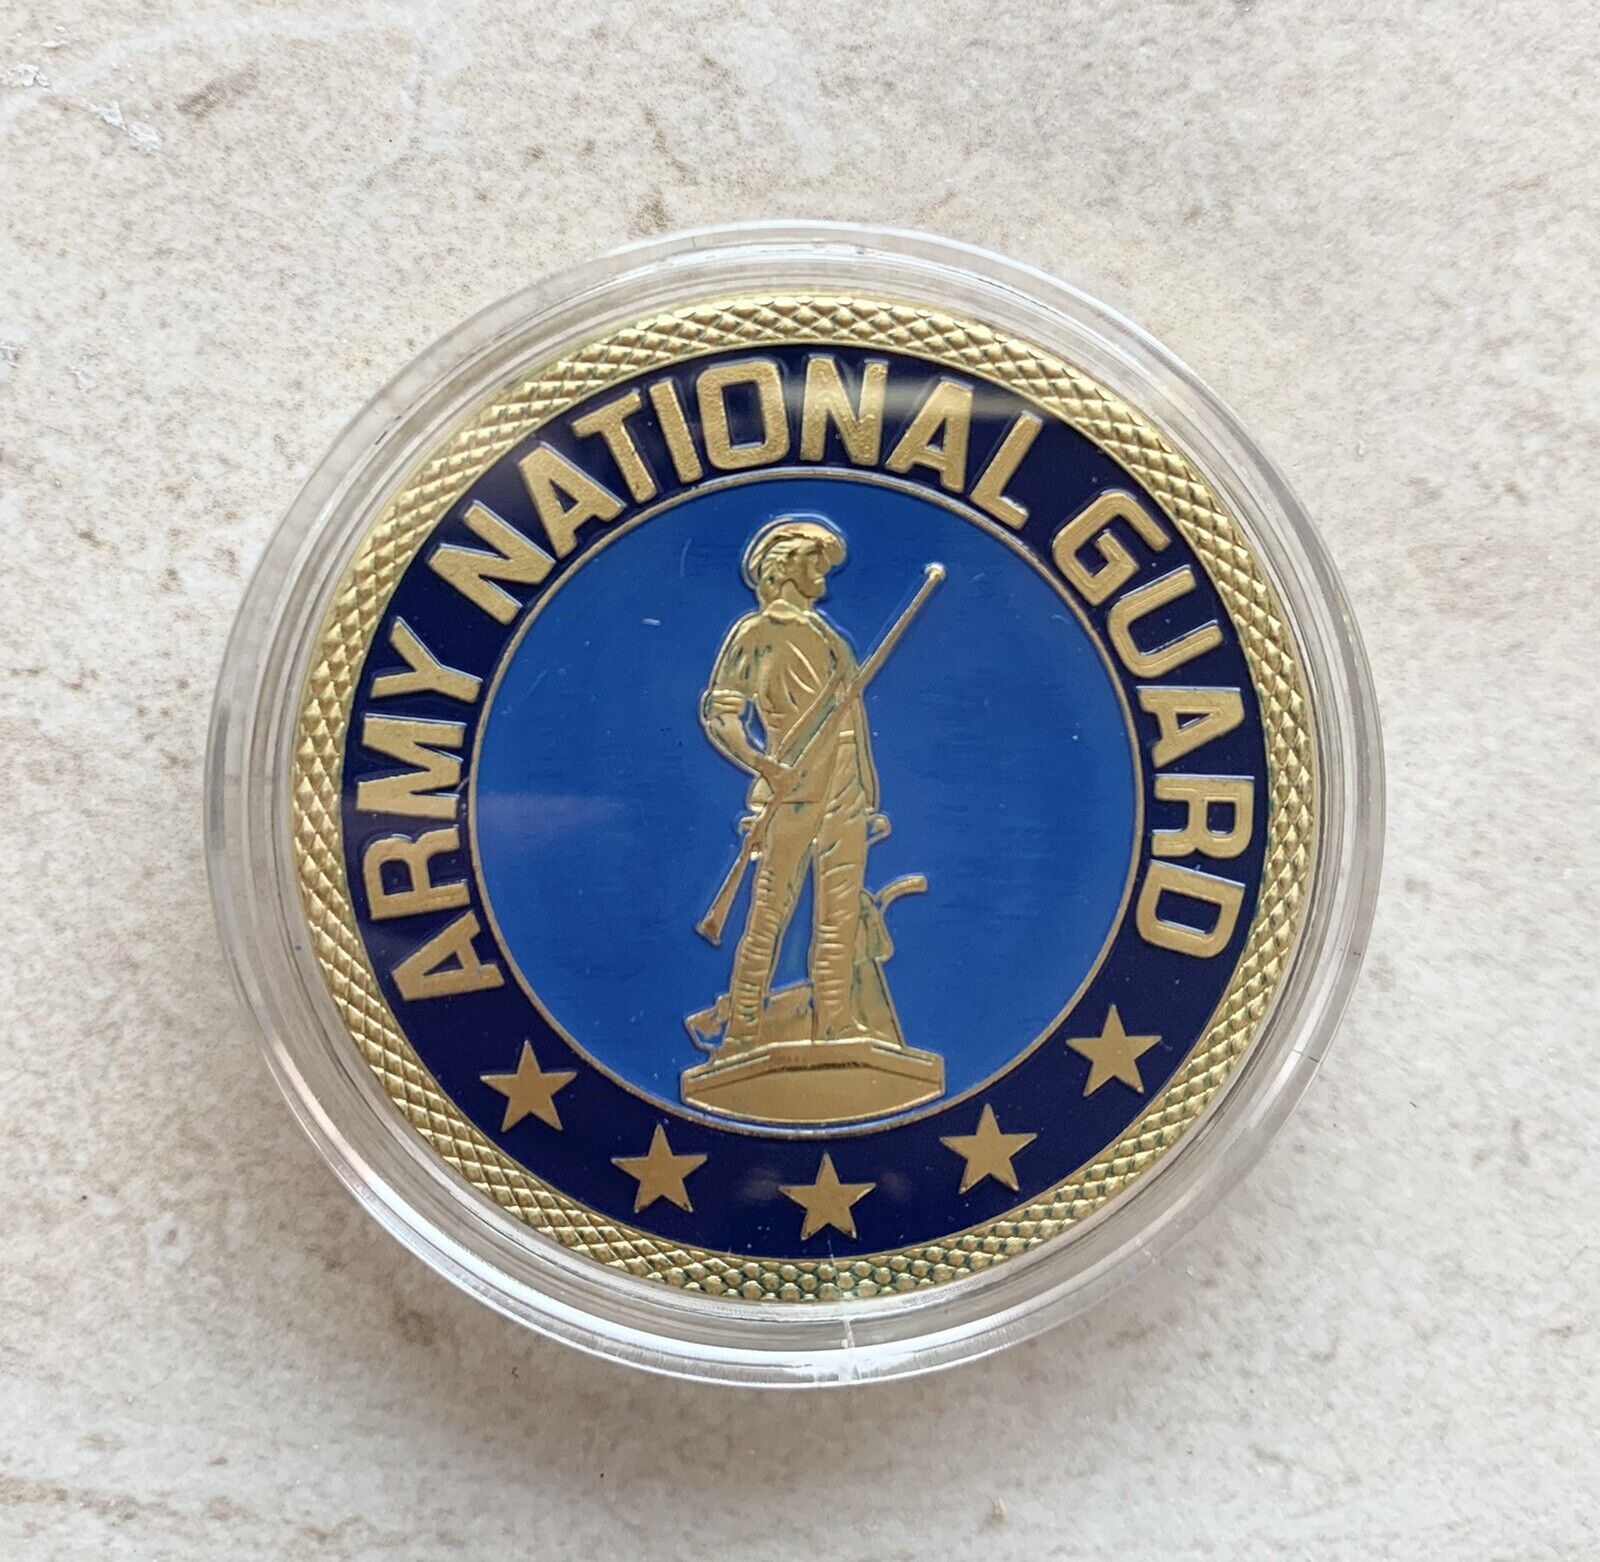 NATIONAL GUARD US Army *Always There Always Ready Challenge Coin